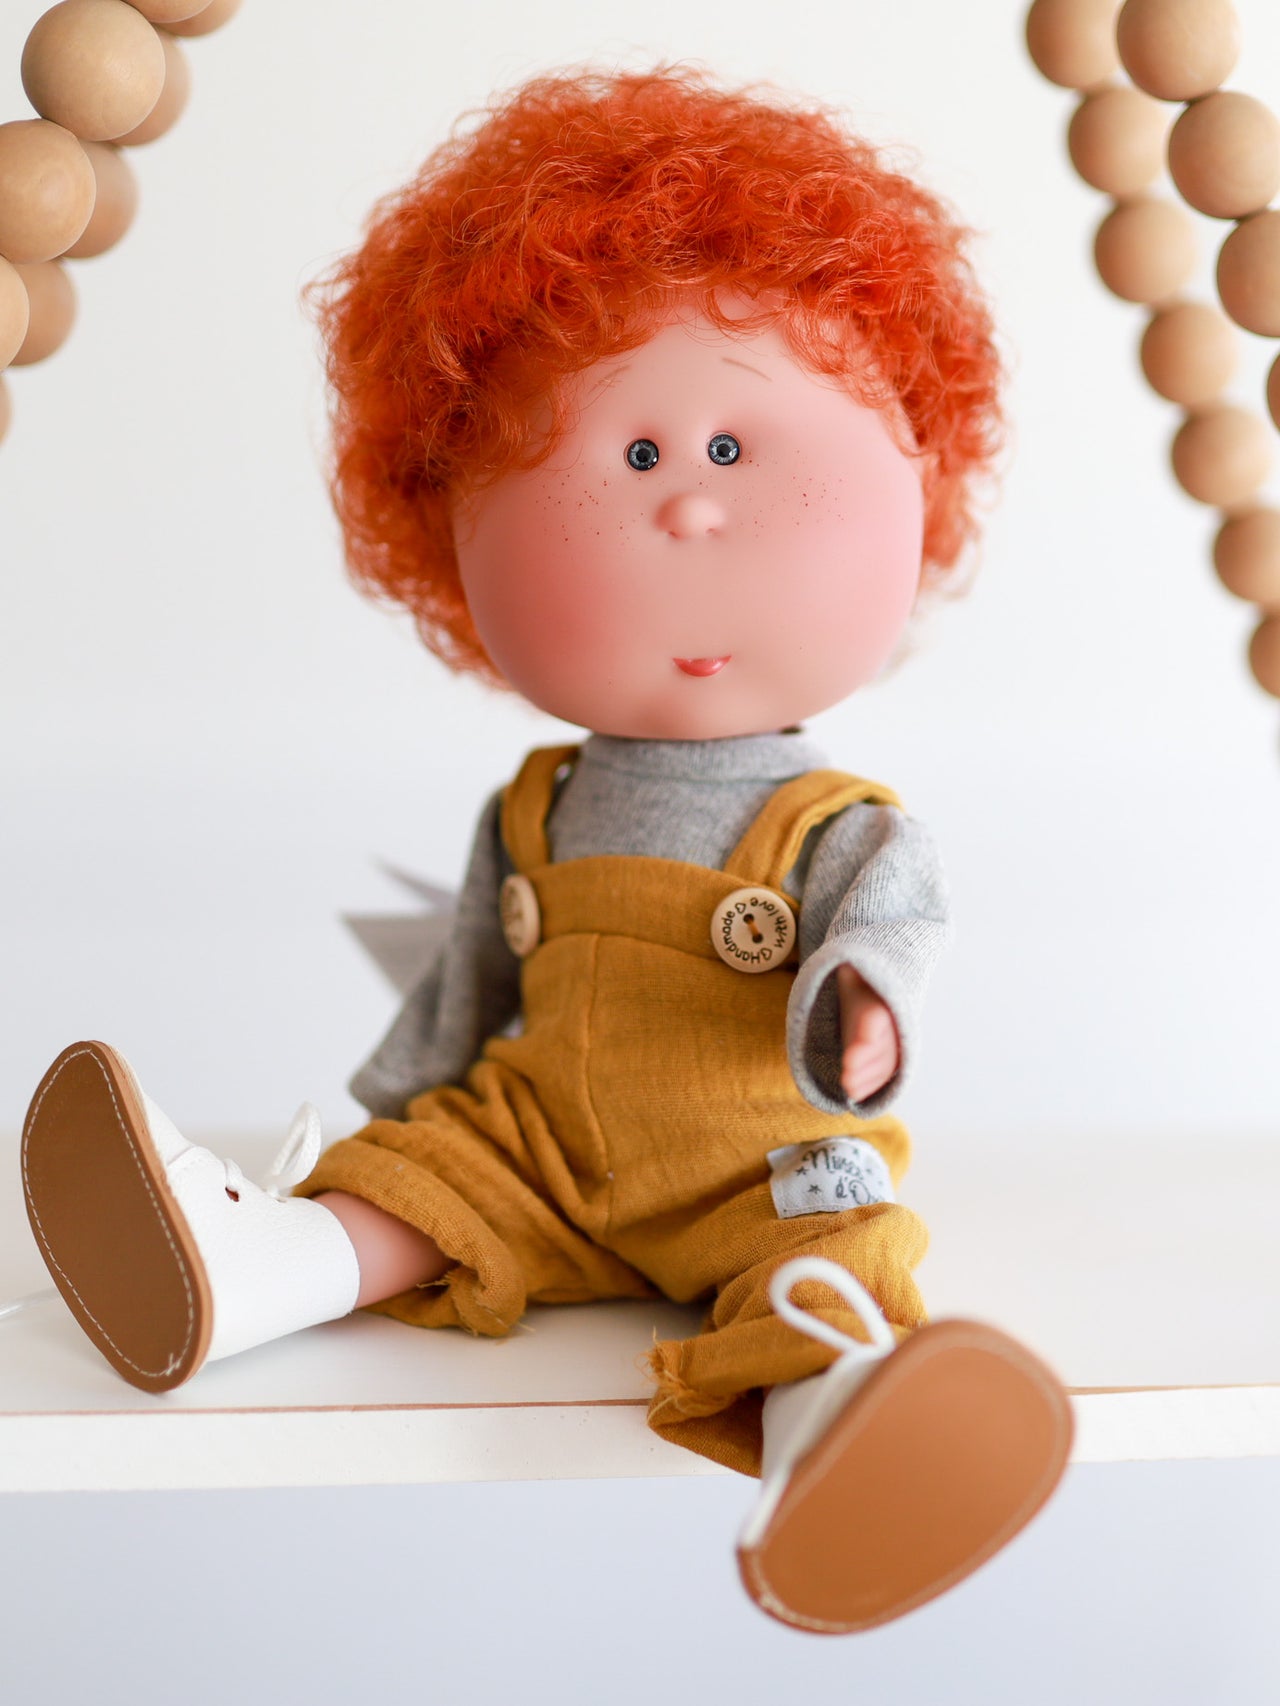 Gavin  - Fully Dressed Mio Doll with Red Curly Hair